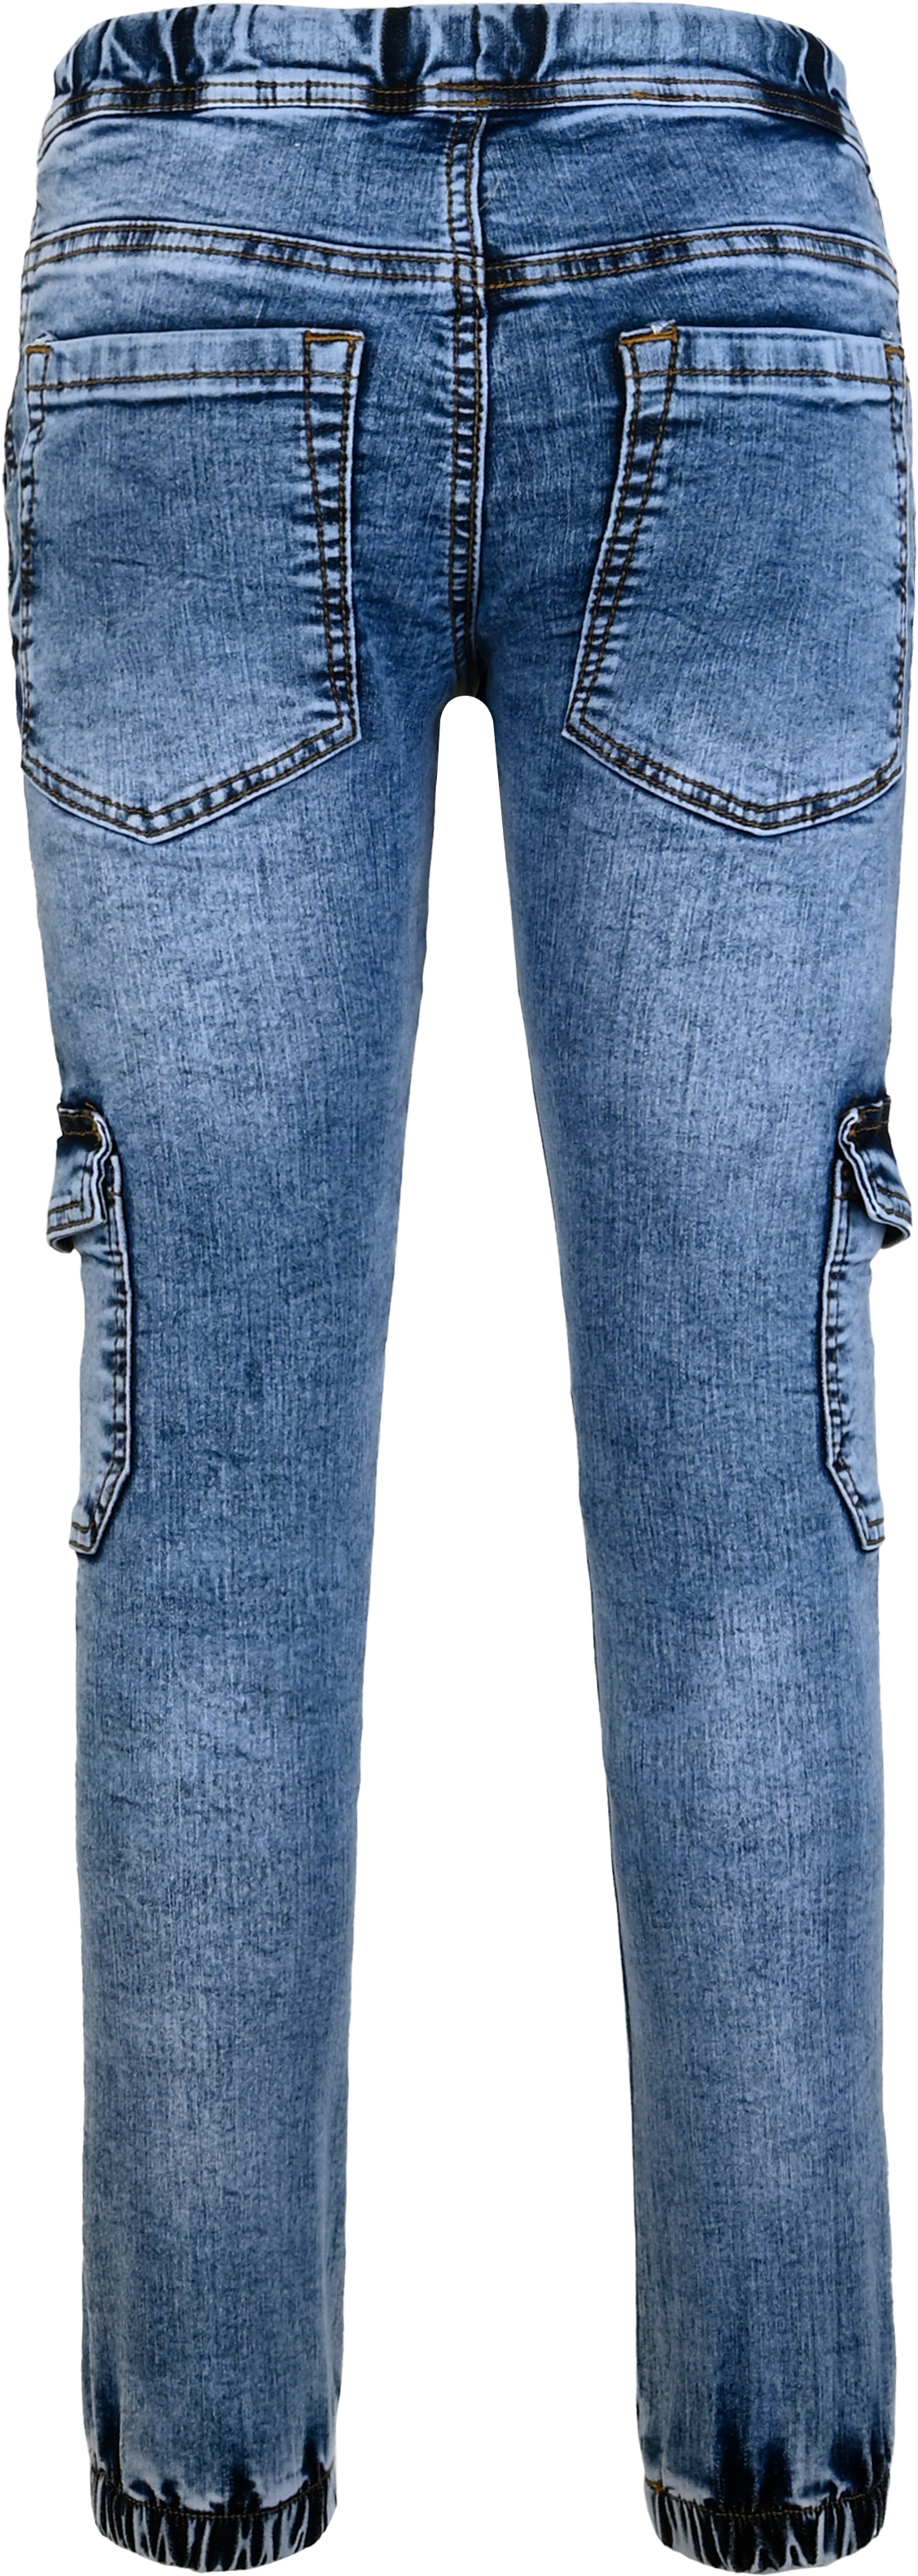 2838-Boys Cargo Jean Joggpant Ultrastretch, available in Normal